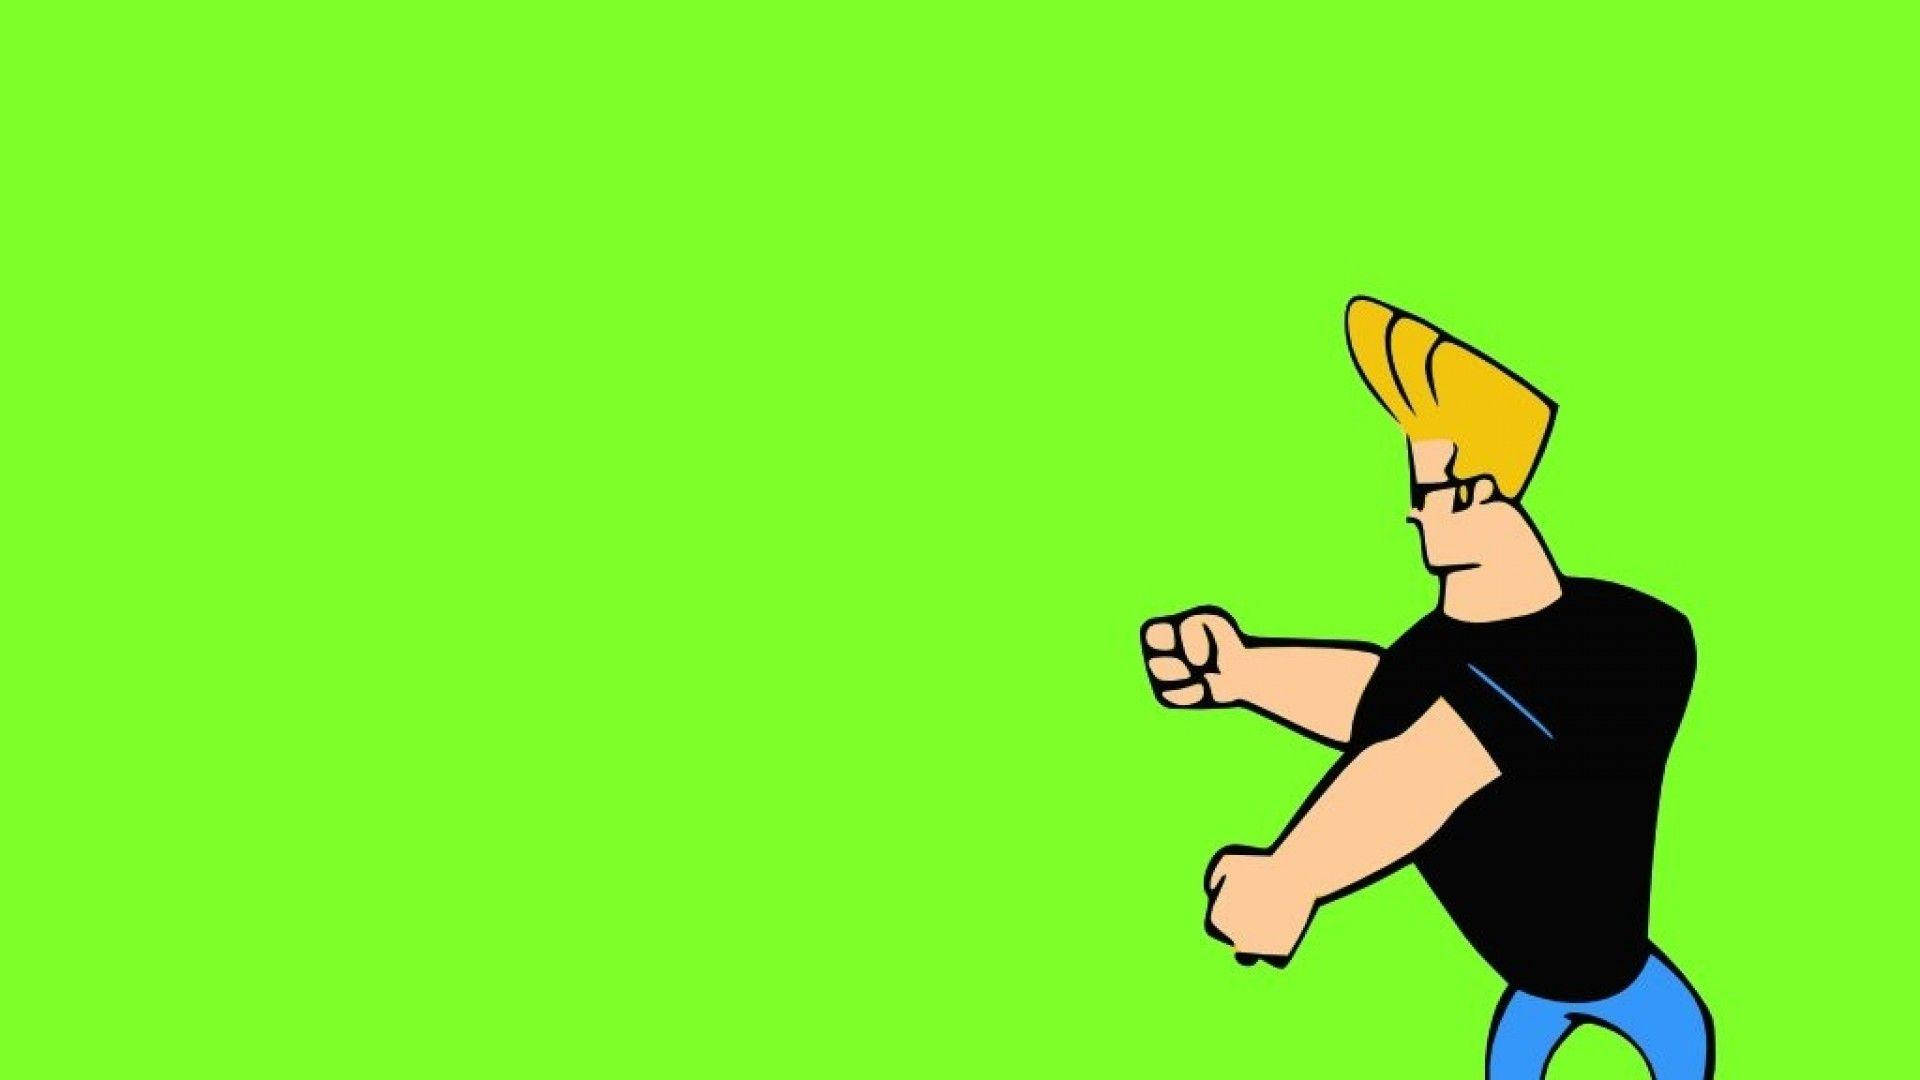 Made another one of Johnny Bravo and Dream Girl  rMinimalWallpaper